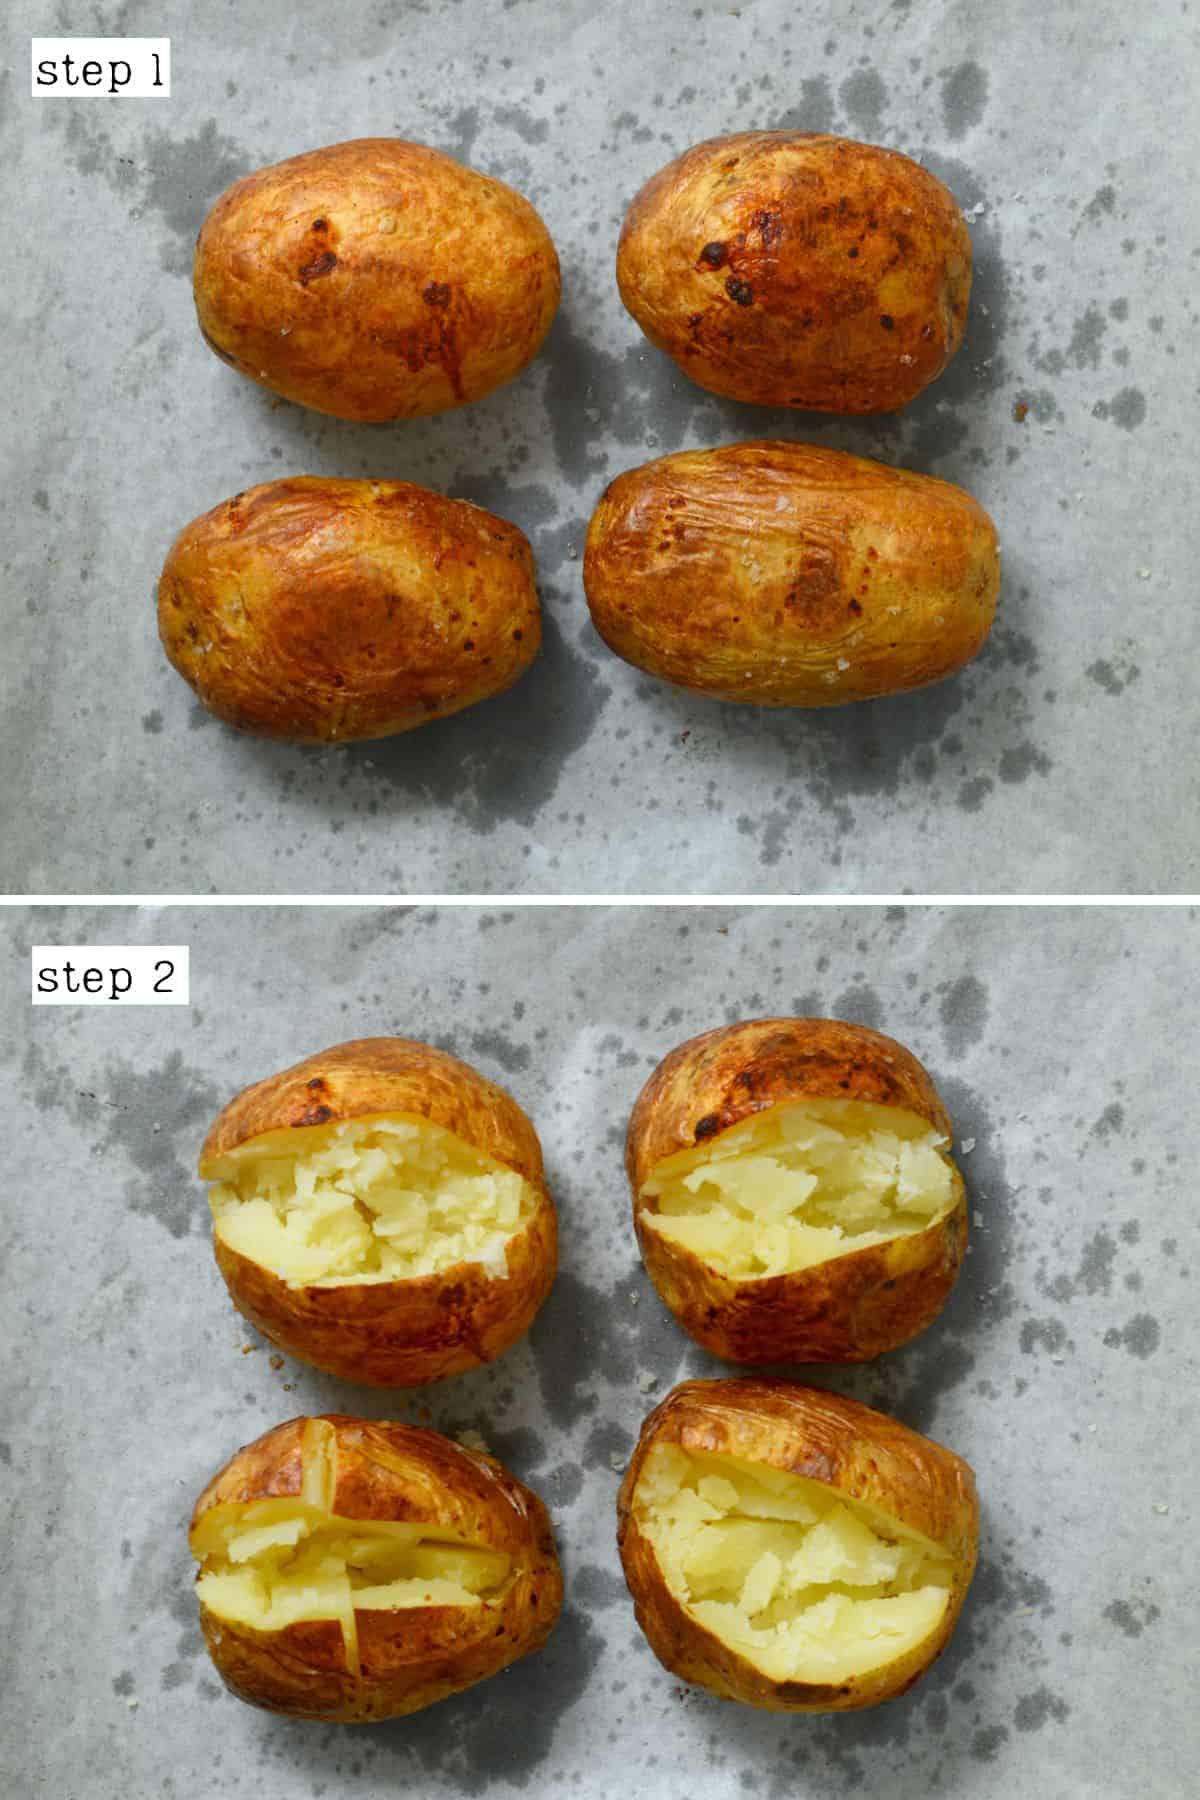 Steps for cutting baked potatoes